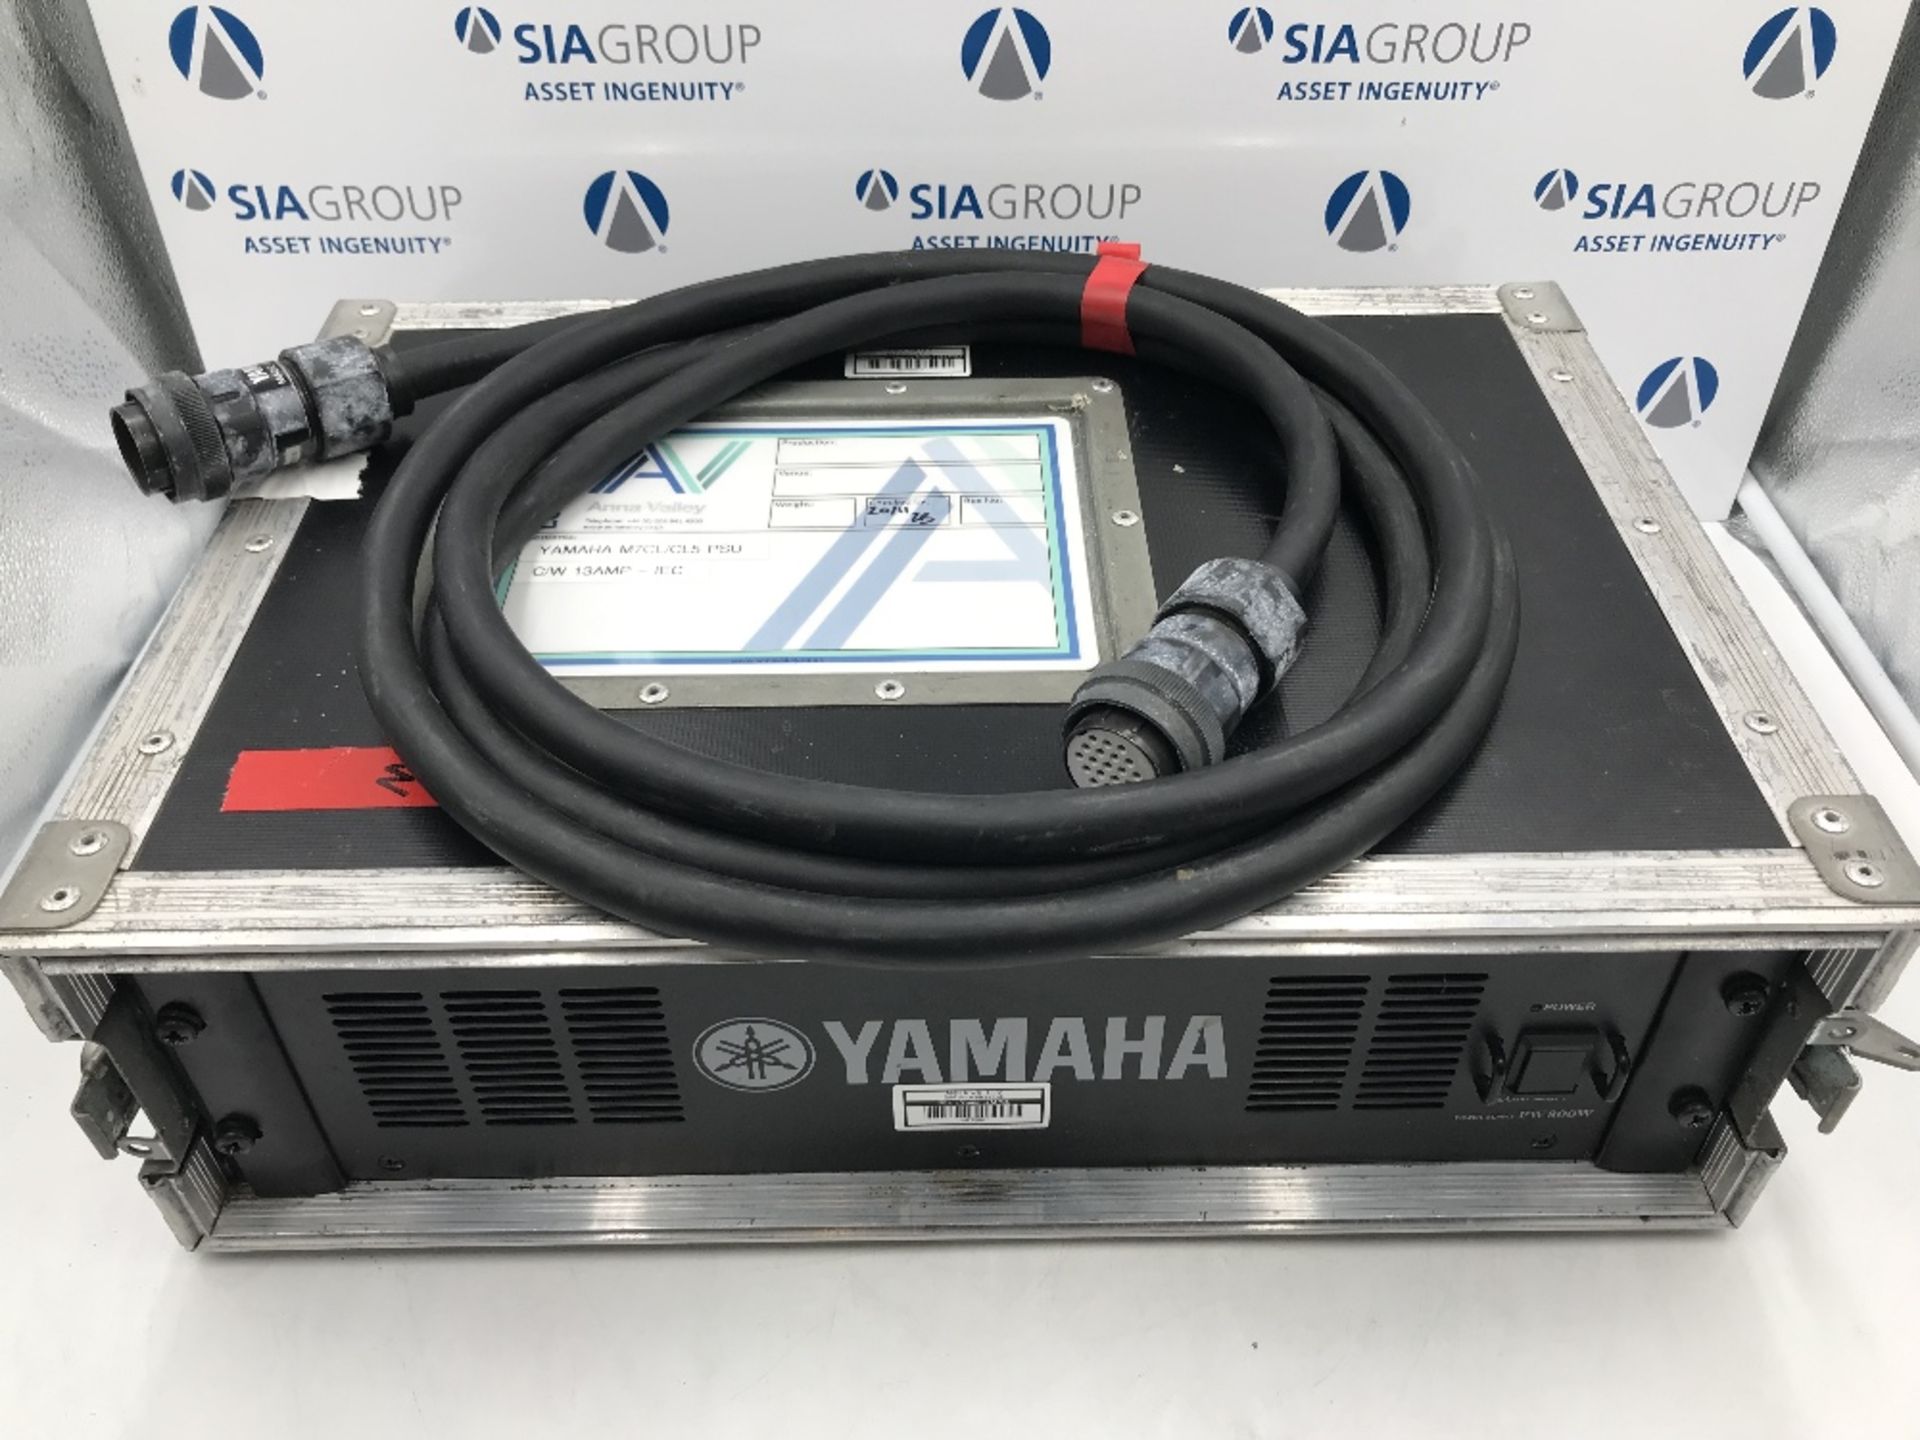 Yamaha PW800W Power Supply Housed In Heavy Duty Carry Case - Image 5 of 5